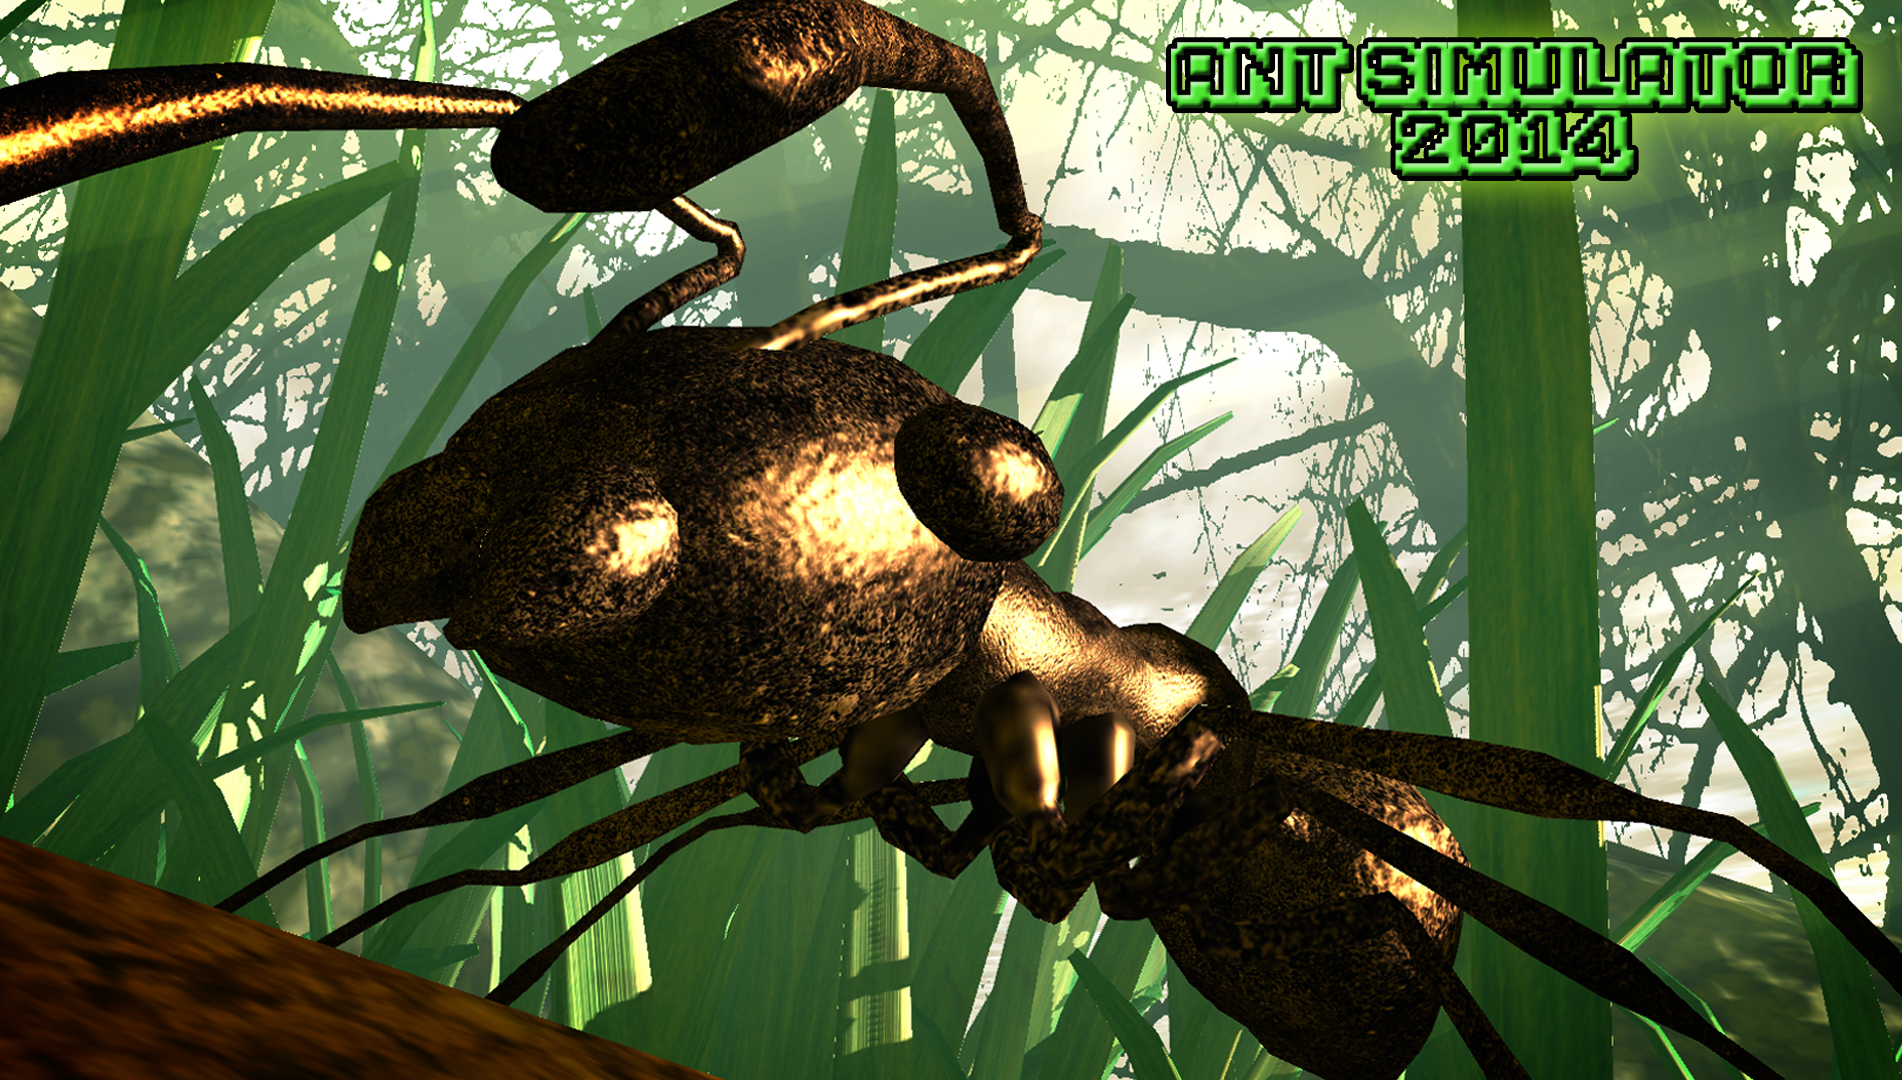 “Ant Simulator” Cancelled and Lead Dev Quits - Money Stolen and Used for 